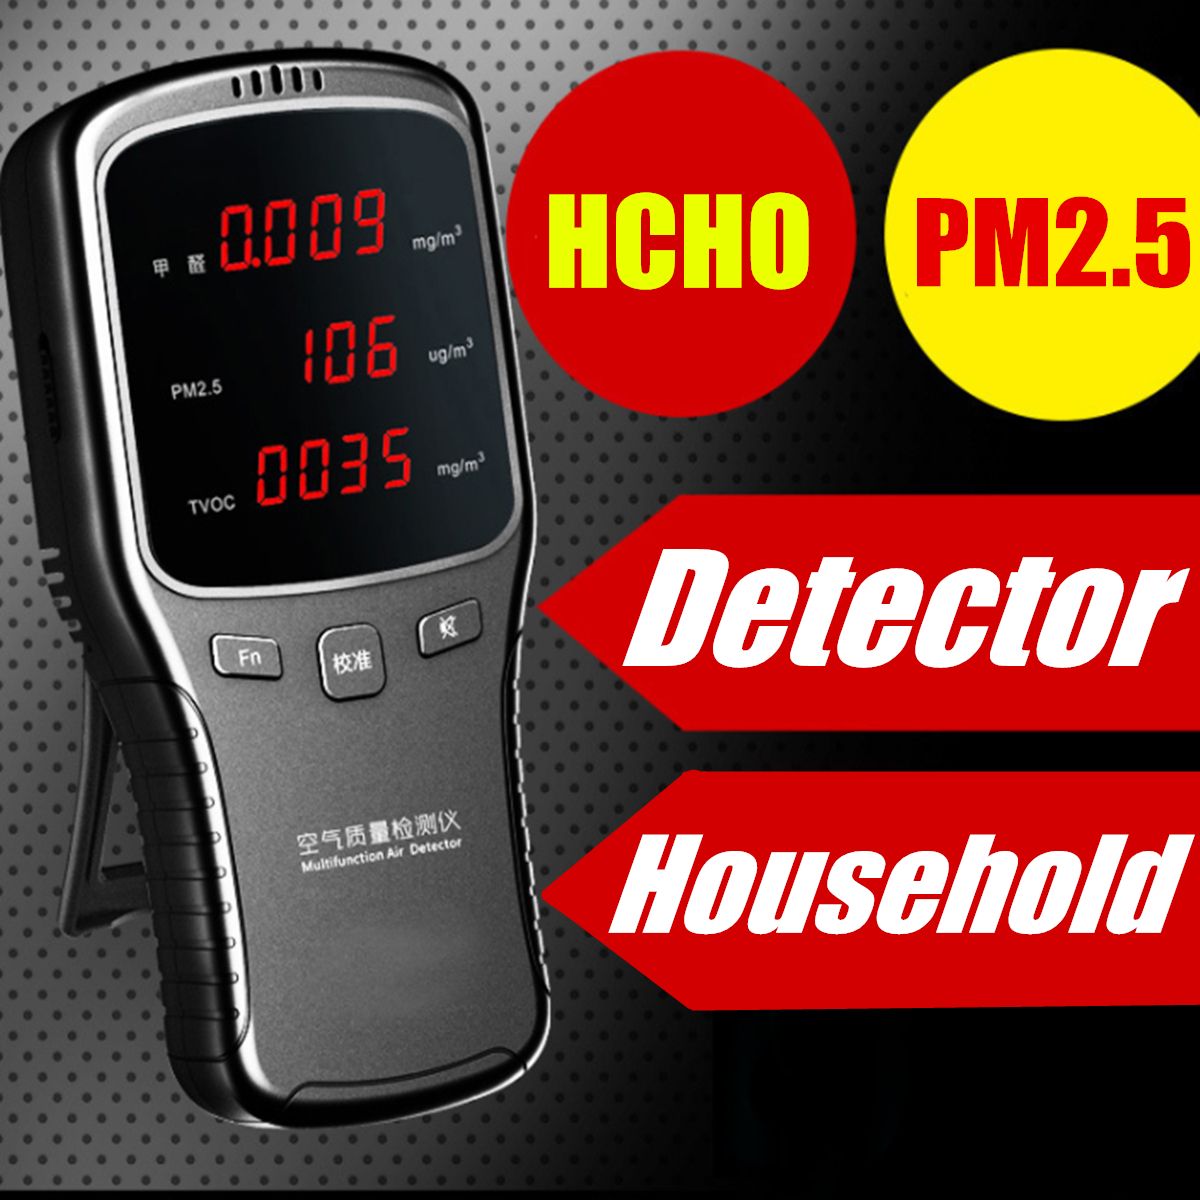 Household-Laser-PM25-Monitor-Formaldehyde-Detector-HCHO-TVOC-Air-Quality-1628422